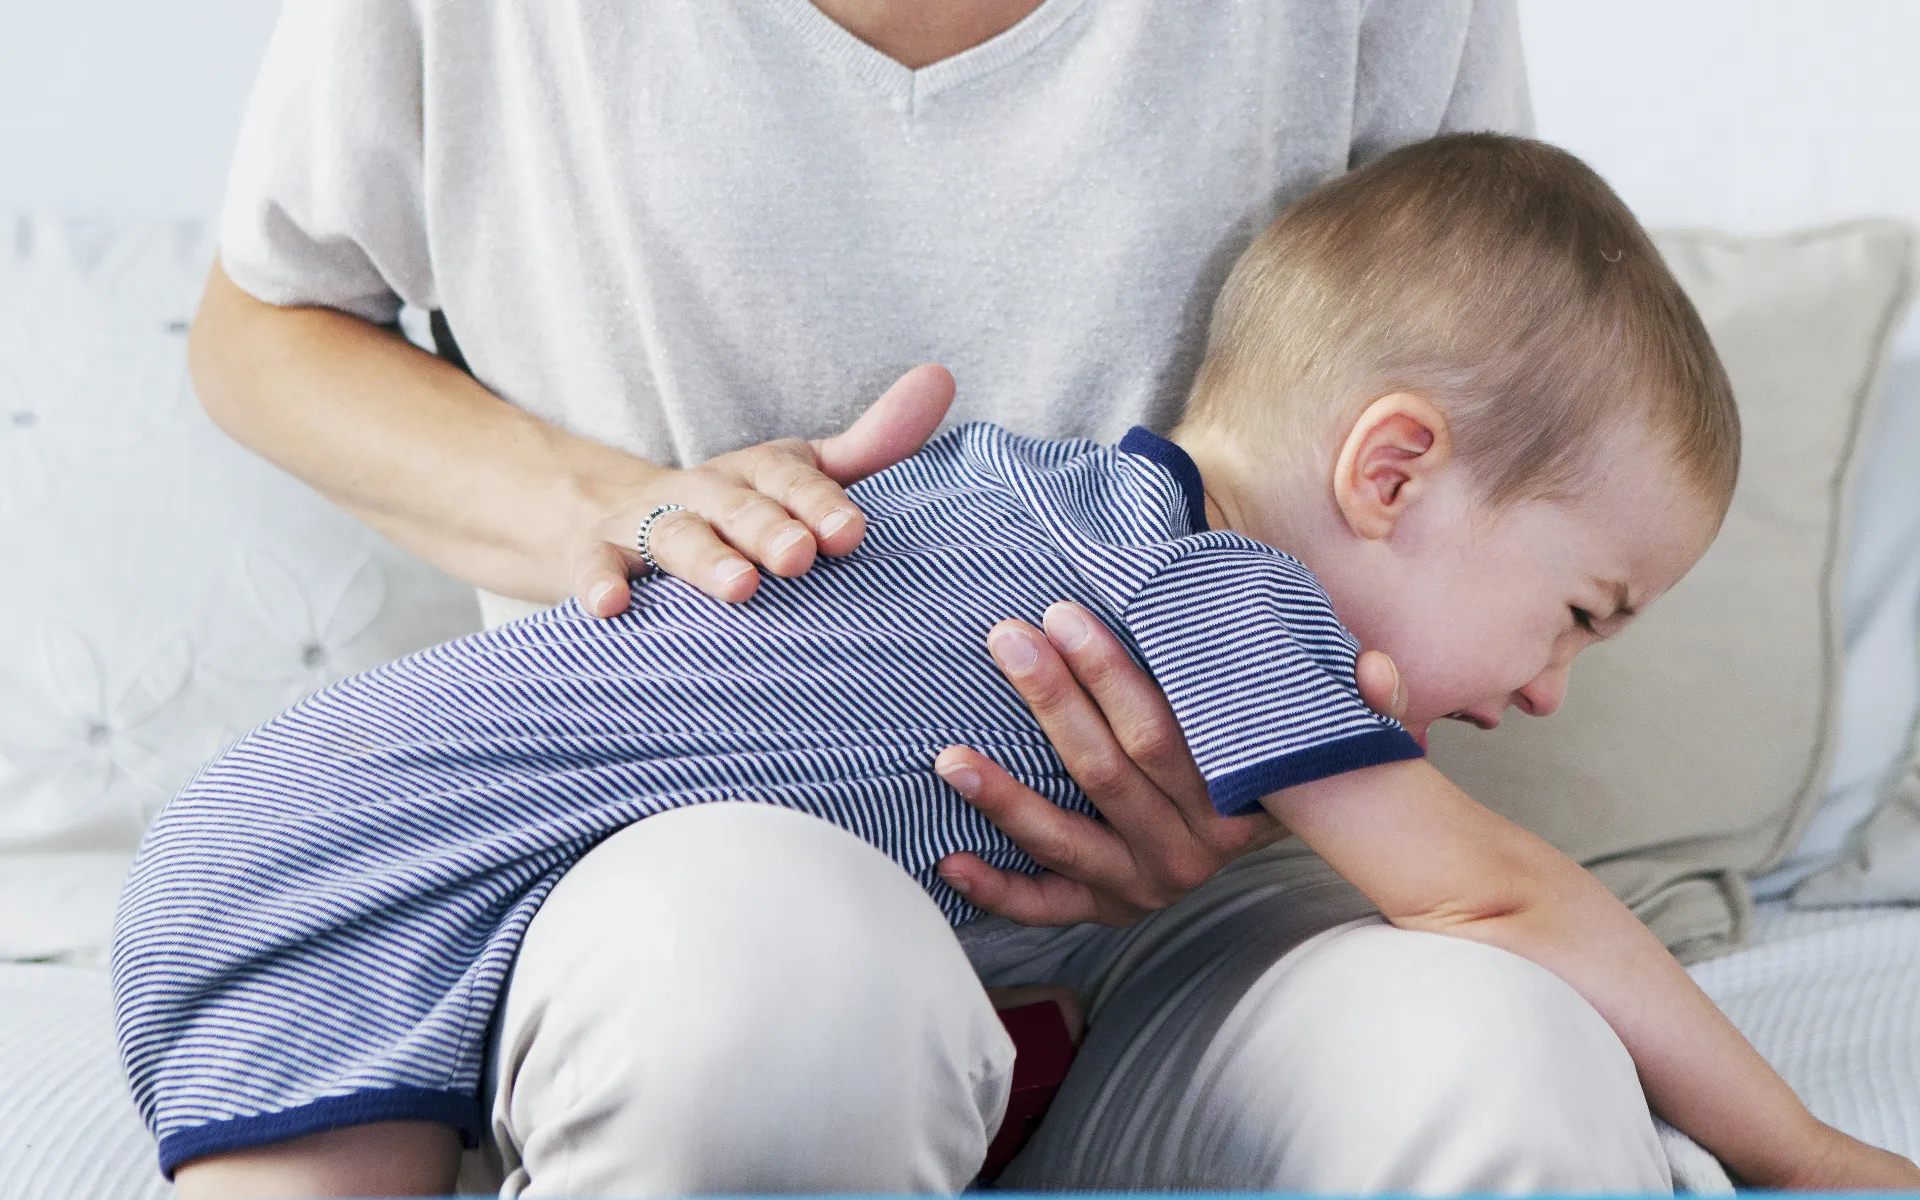 9 Steps to Save a Choking Baby